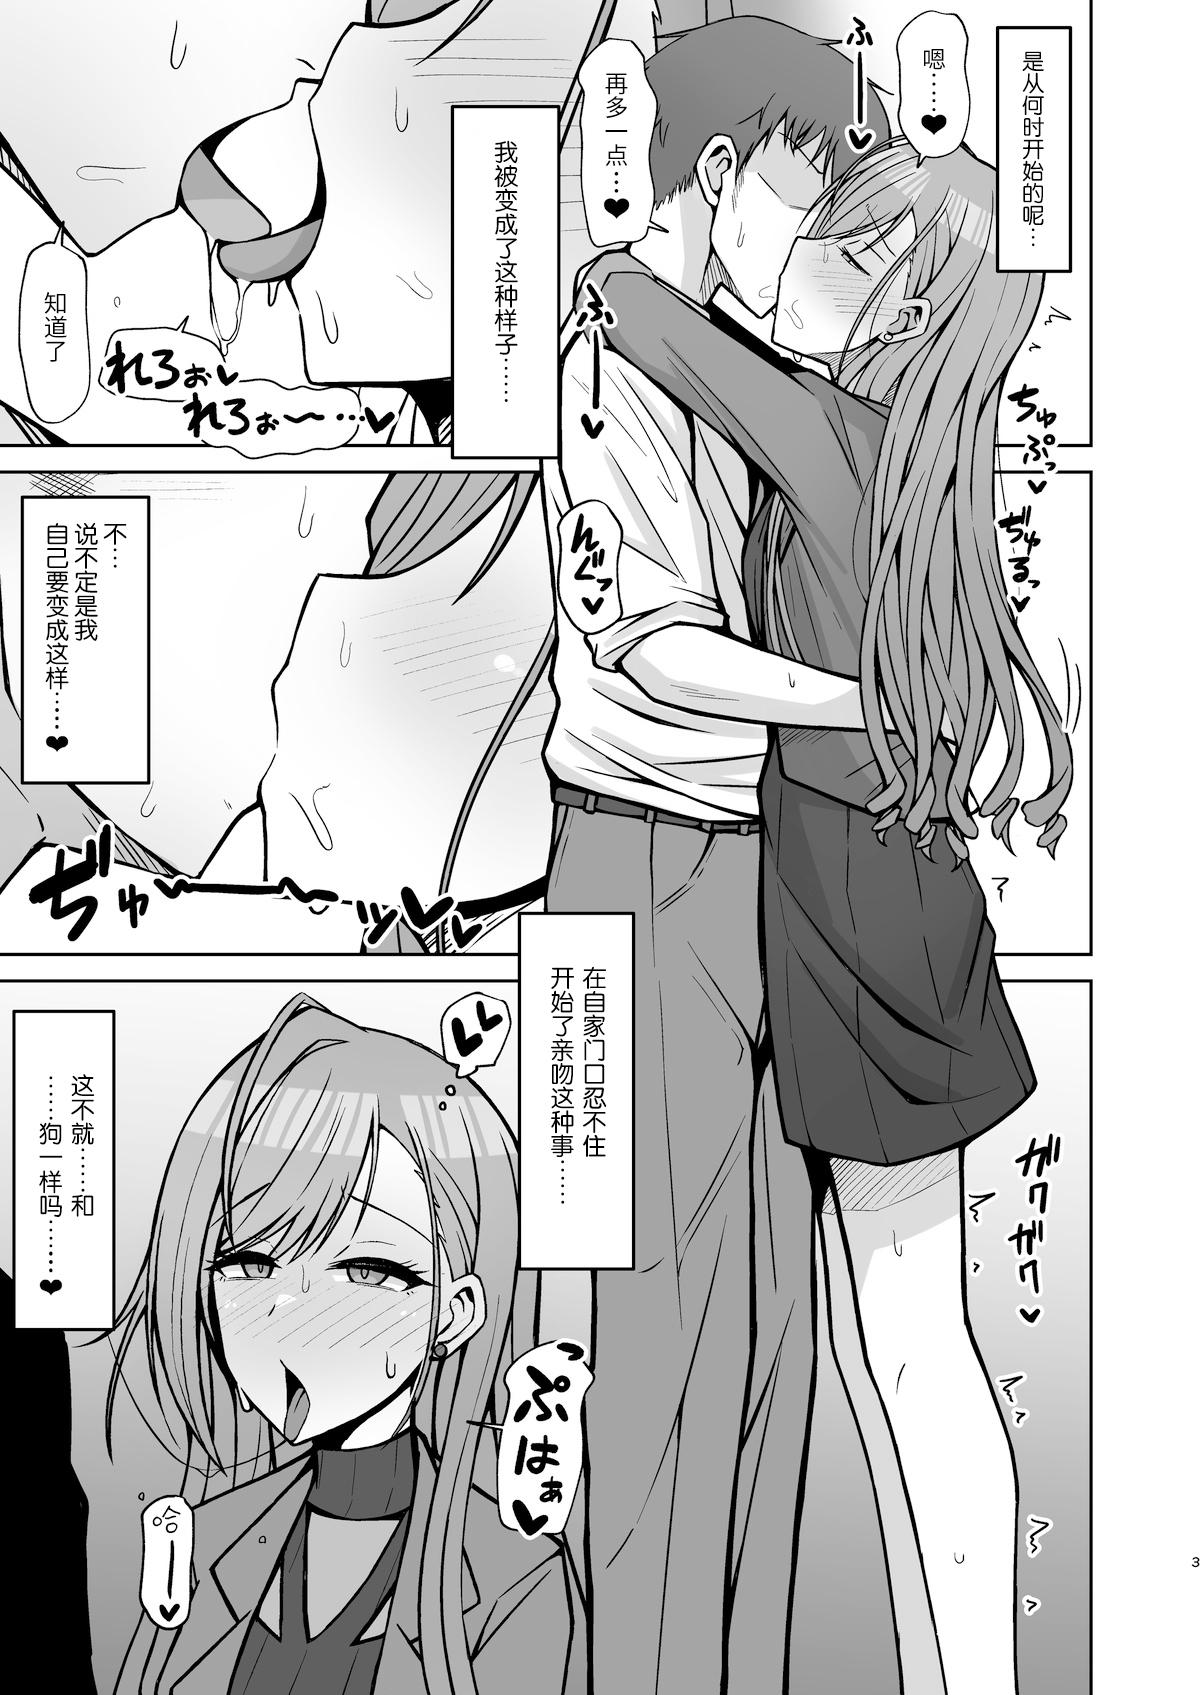 Spreading InuCos H tte Sugoi no yo! - The idolmaster Butts - Page 2